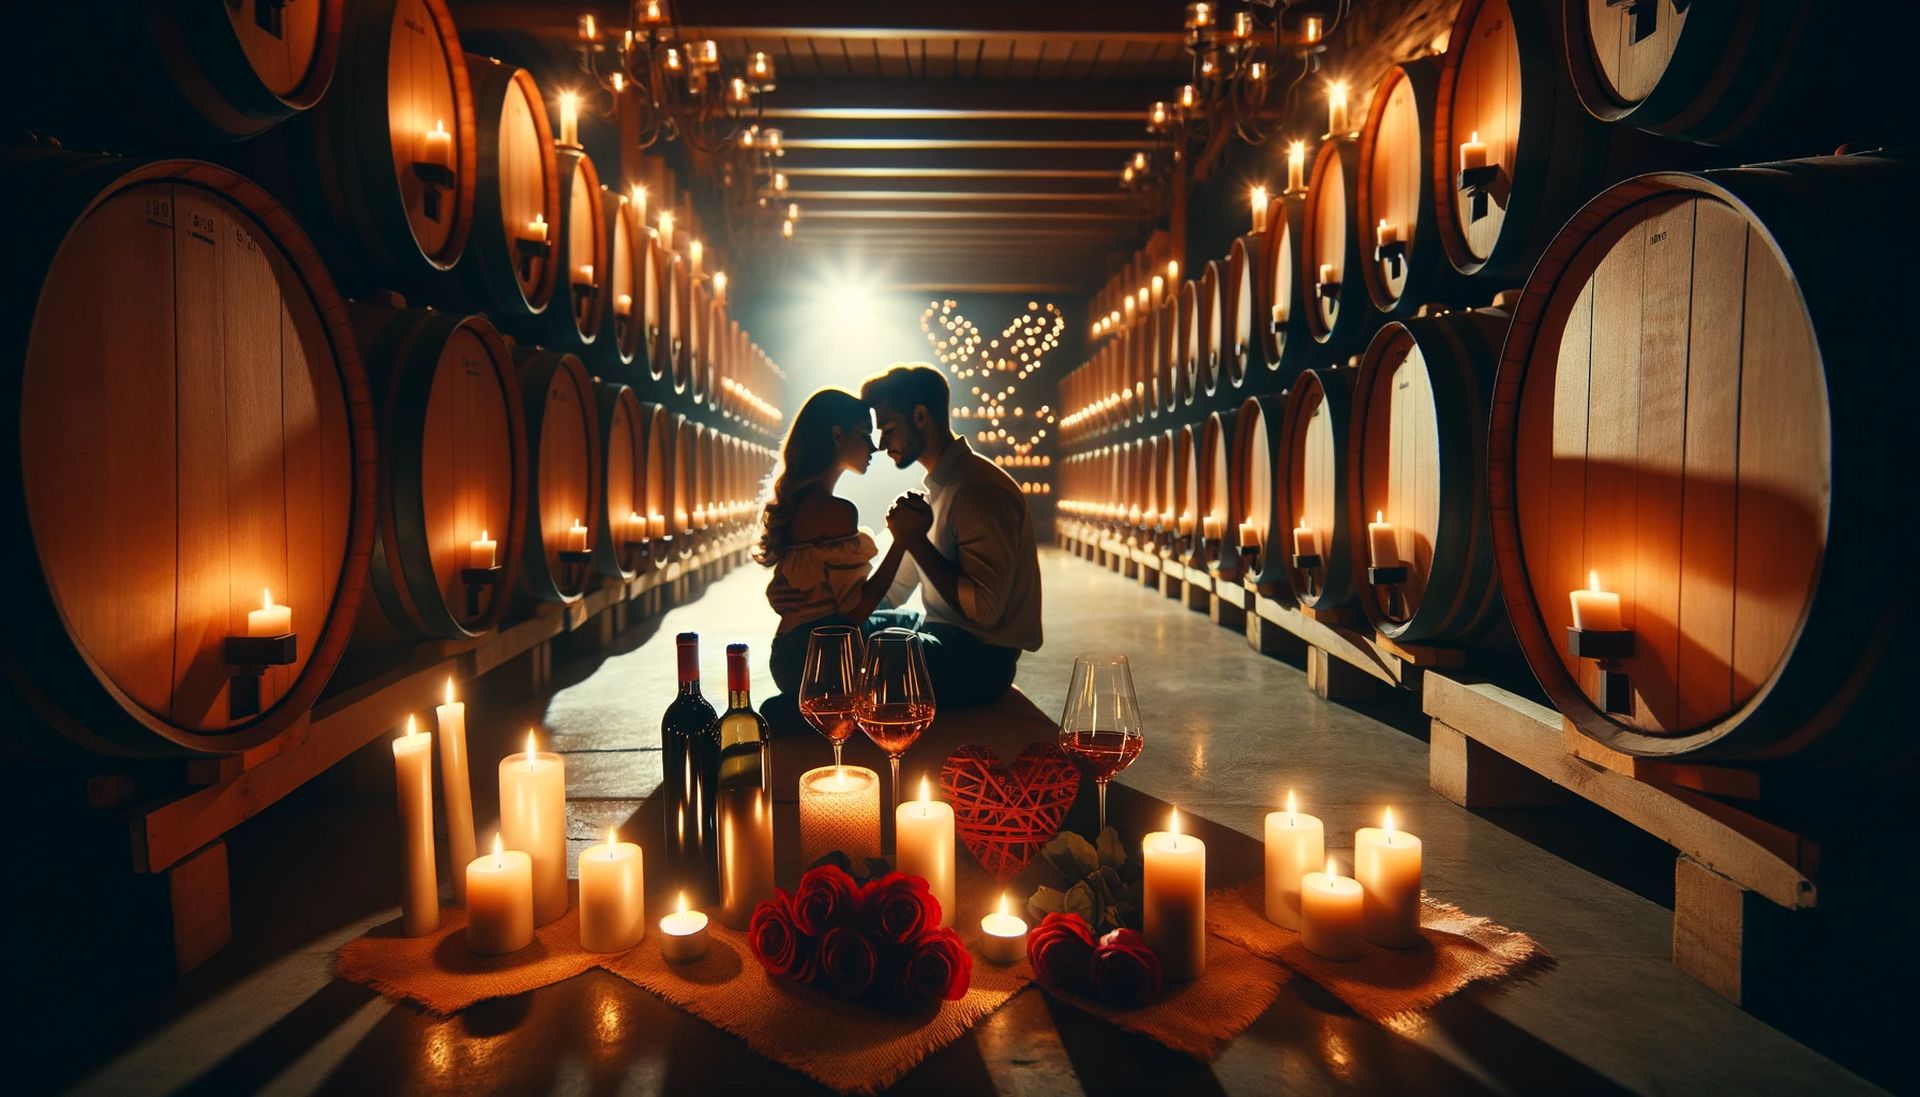 Valentine's Day Trip Bliss: A romantic, candlelit wine cellar with a couple enjoying a quiet moment. The setting is intimate and warm, featuring rows of wooden wine barrels. | Credit: Encyclopedia Wines